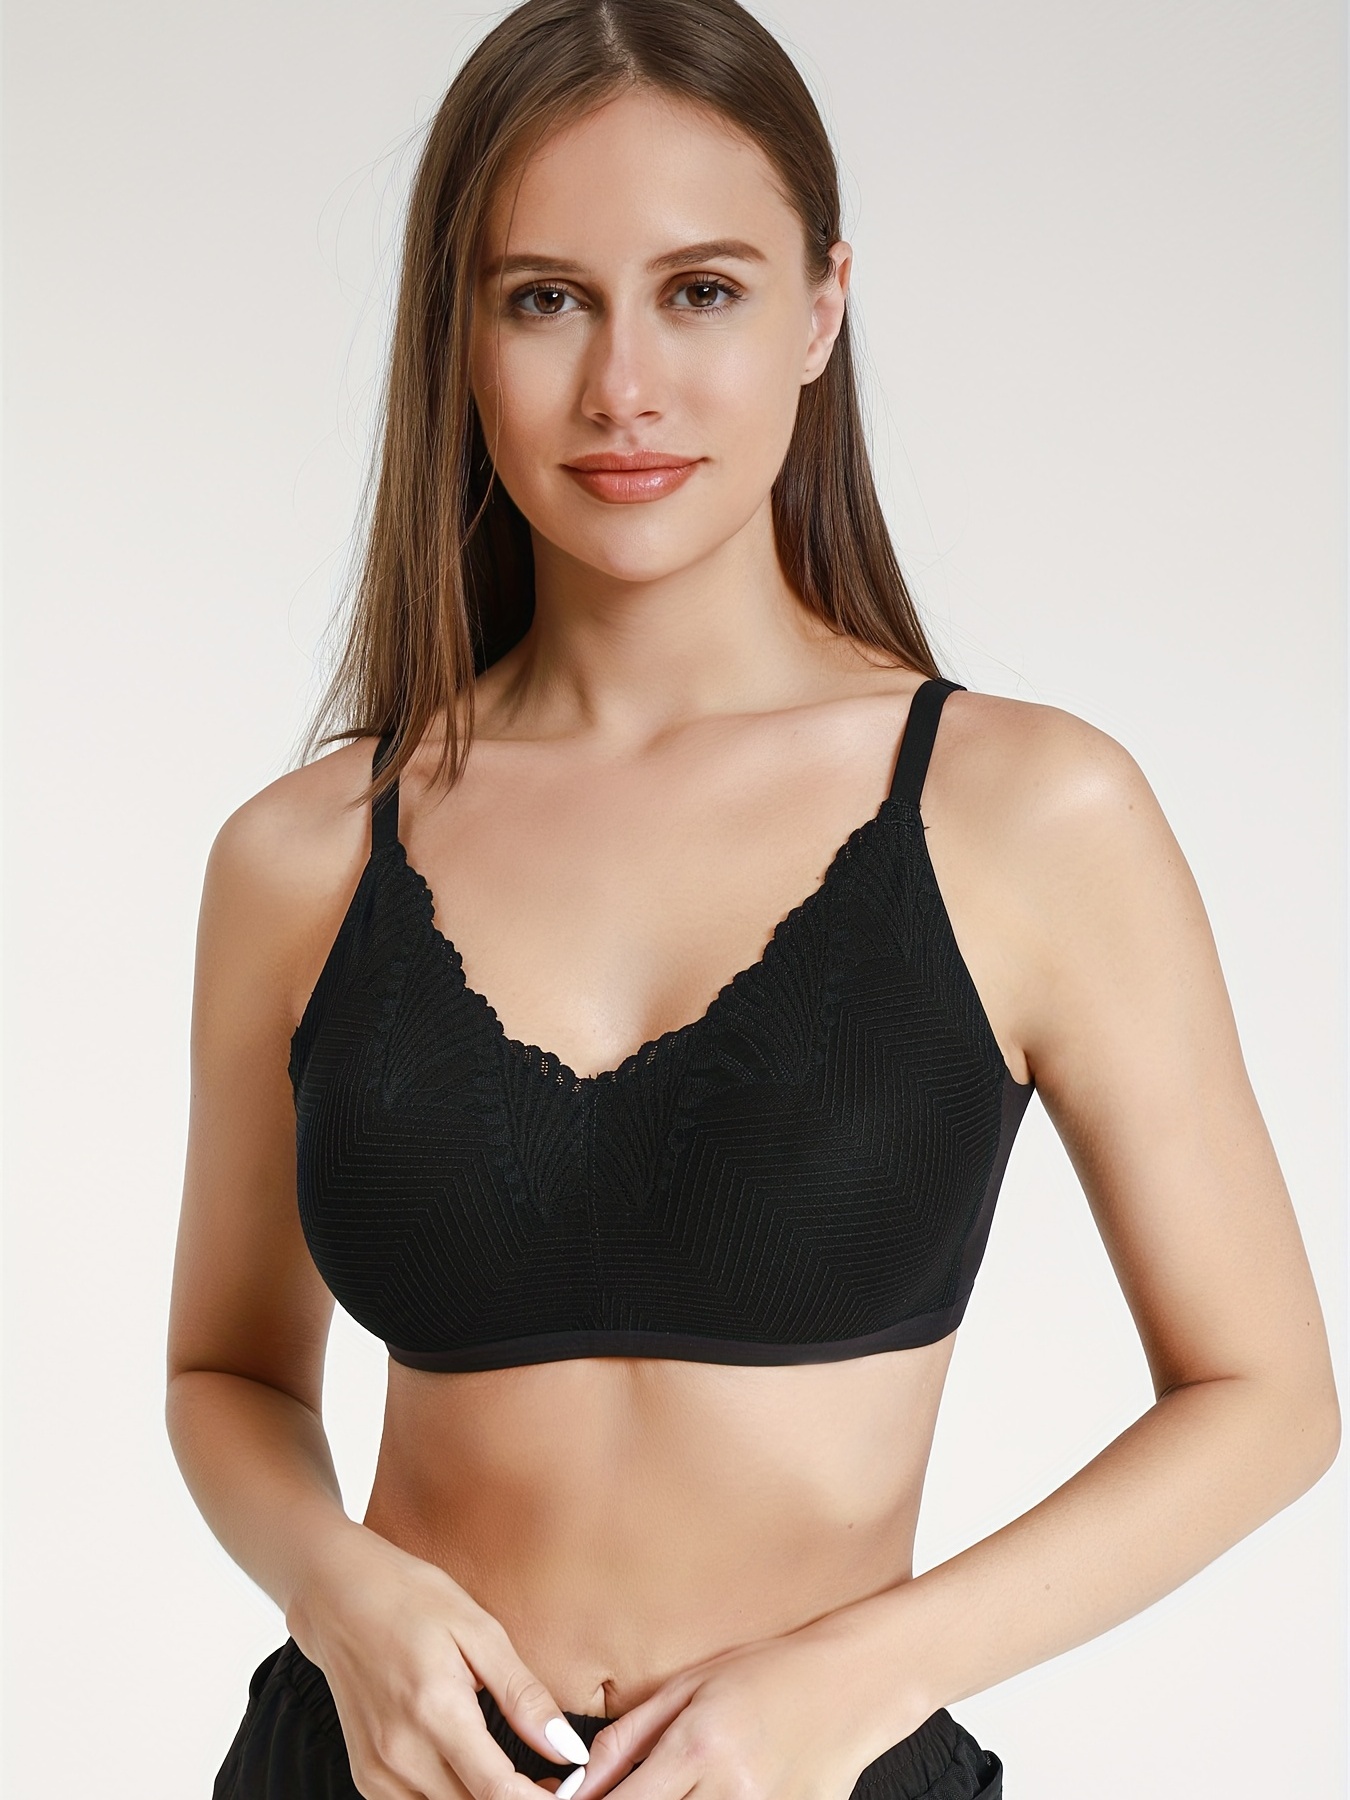 Willow Leaves Pattern Lace Soft Cup Ultra Thin Lined Wireless Bra